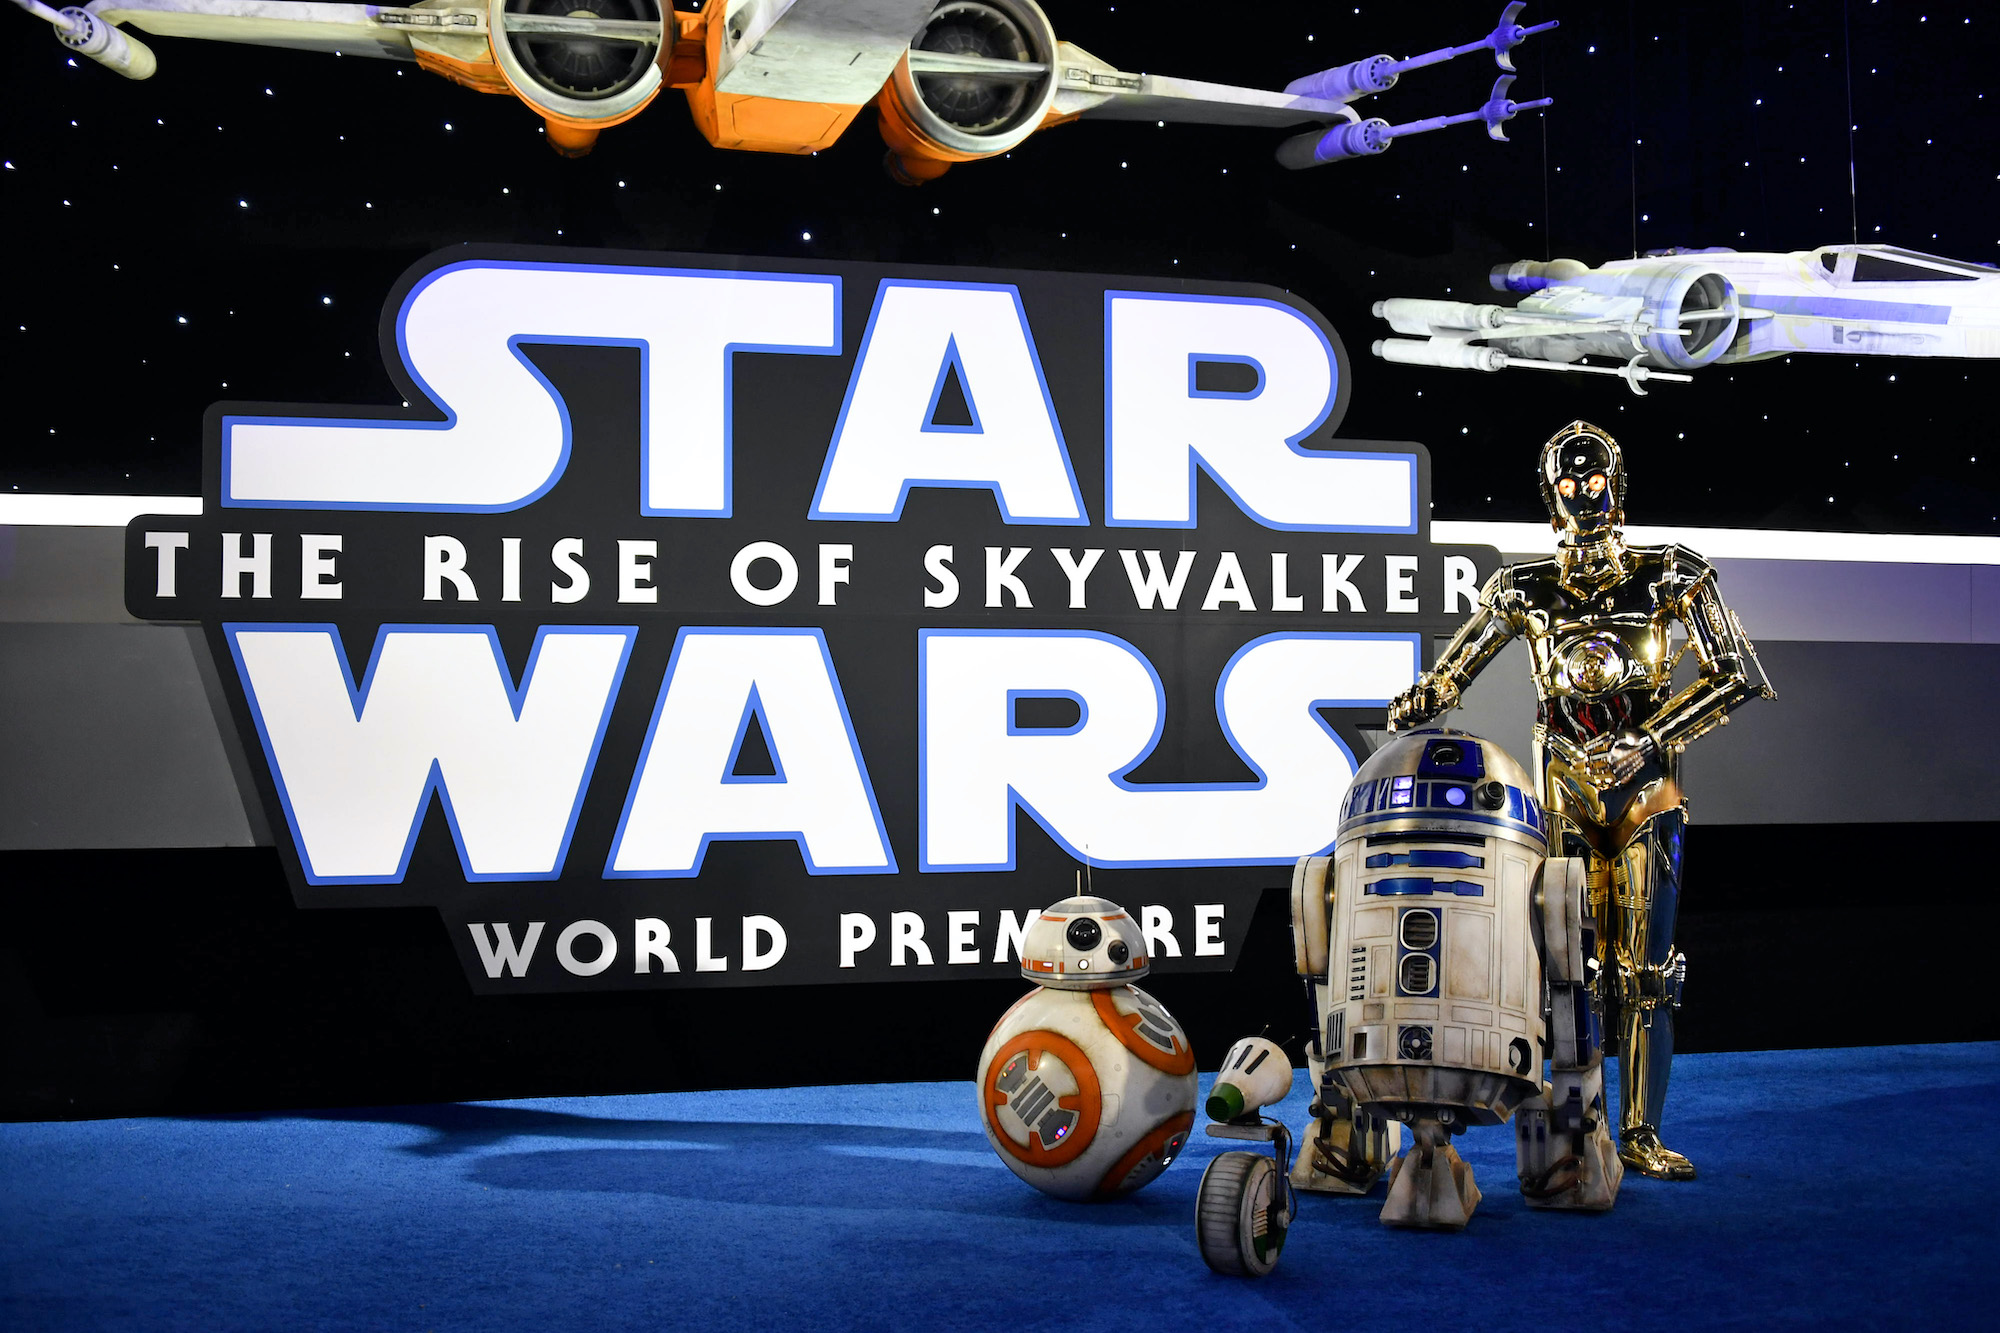 BB-8, R2-D2, and C-3PO arrive for the World Premiere of 'Star Wars: The Rise of Skywalker' 